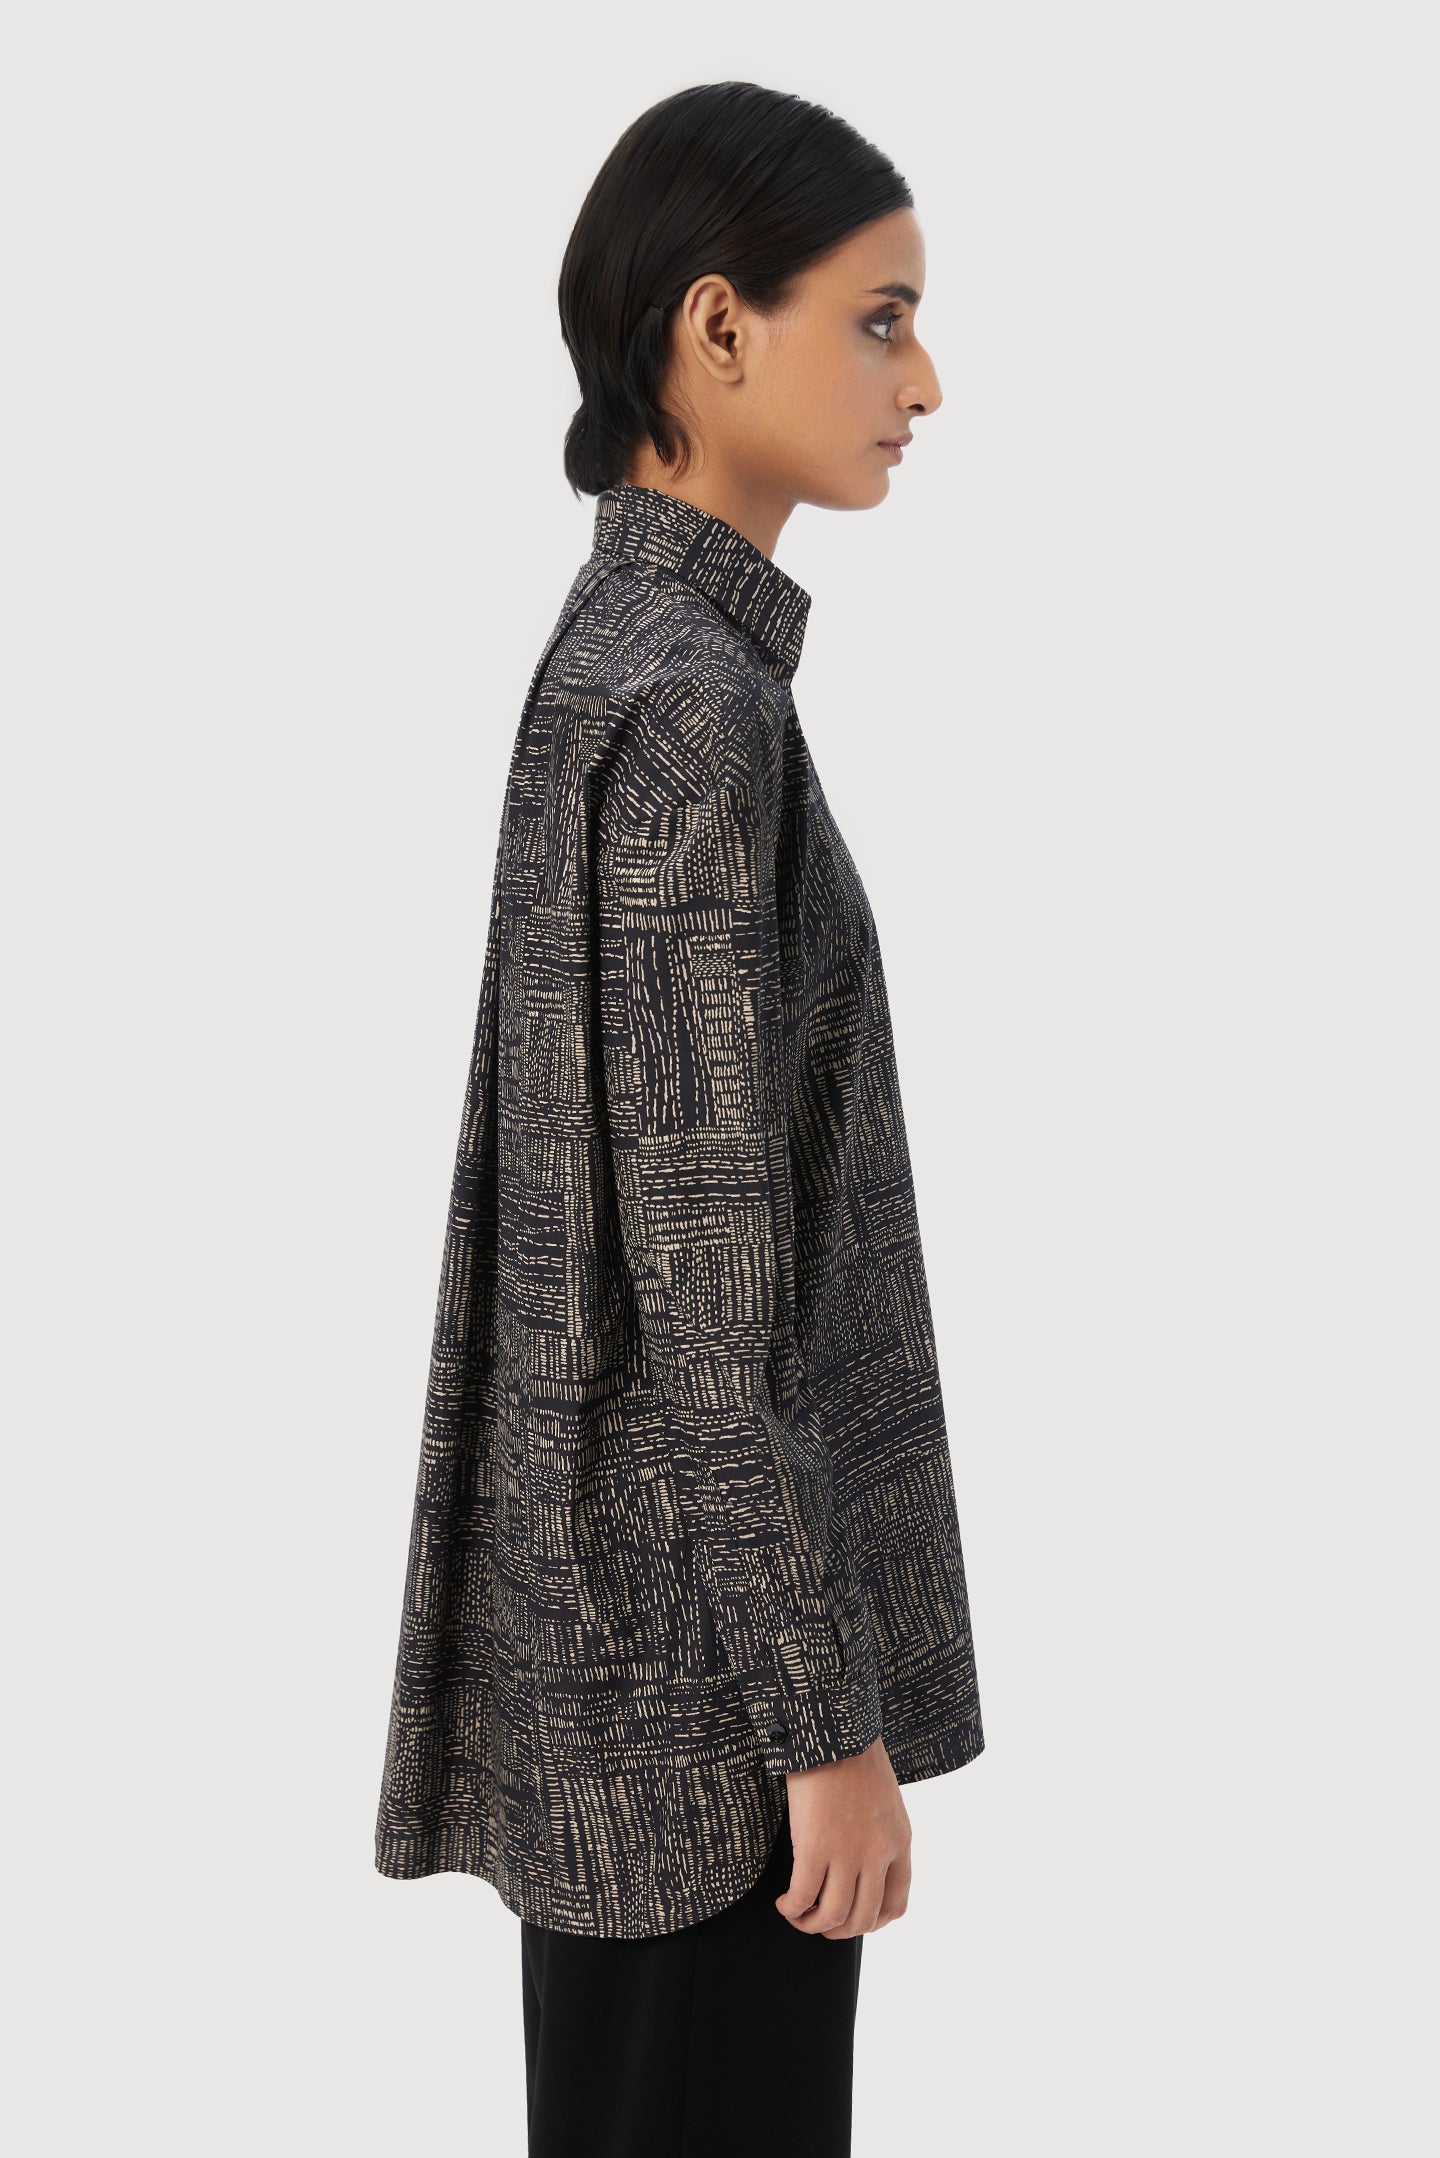 Easy Fit Button-Down Shirt Showcasing an All-Over Kantha Print